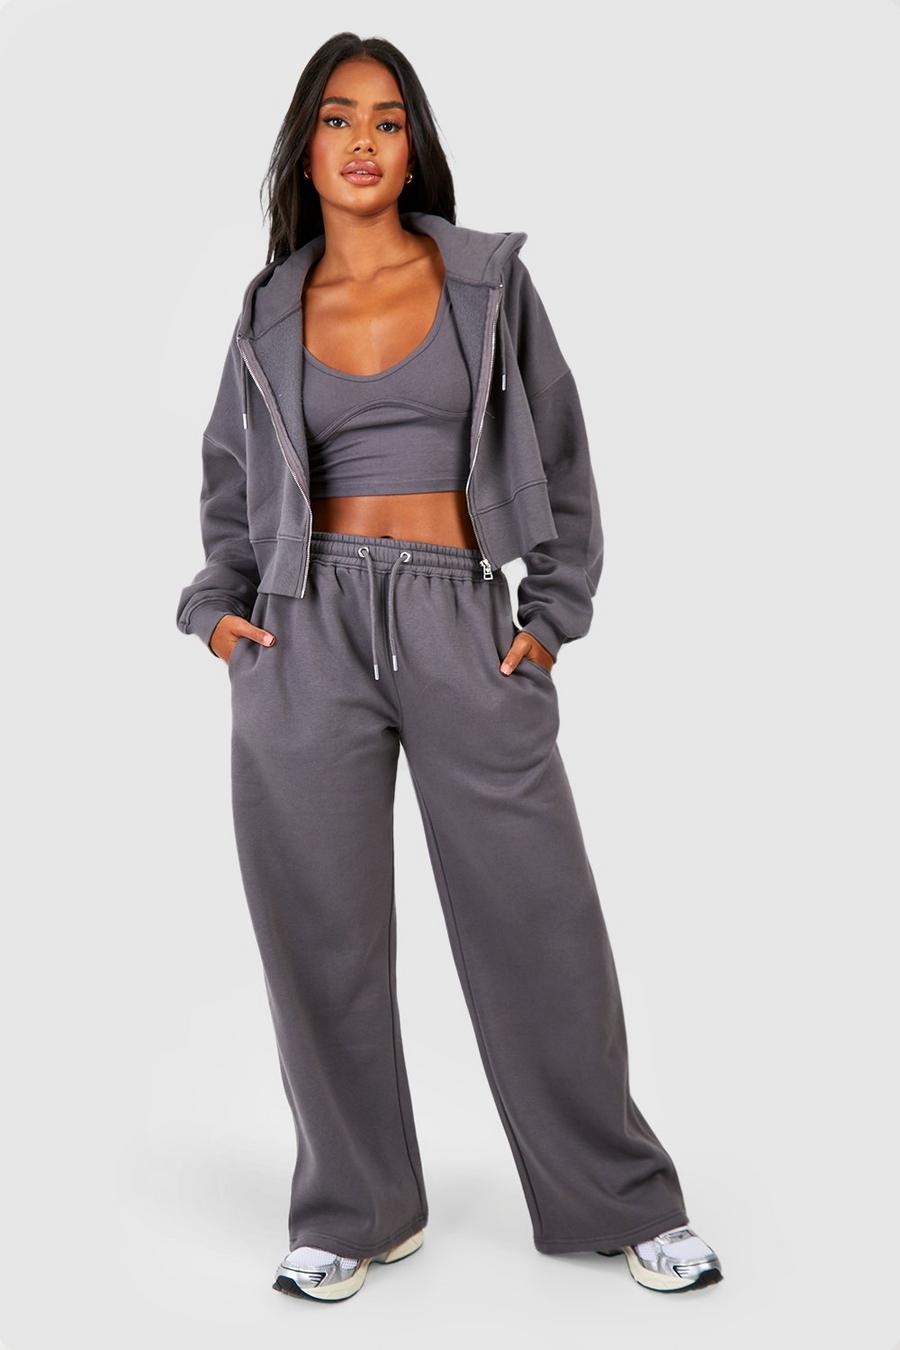 Charcoal grey Seam Detail Crop Top 3 Piece Hooded Tracksuit